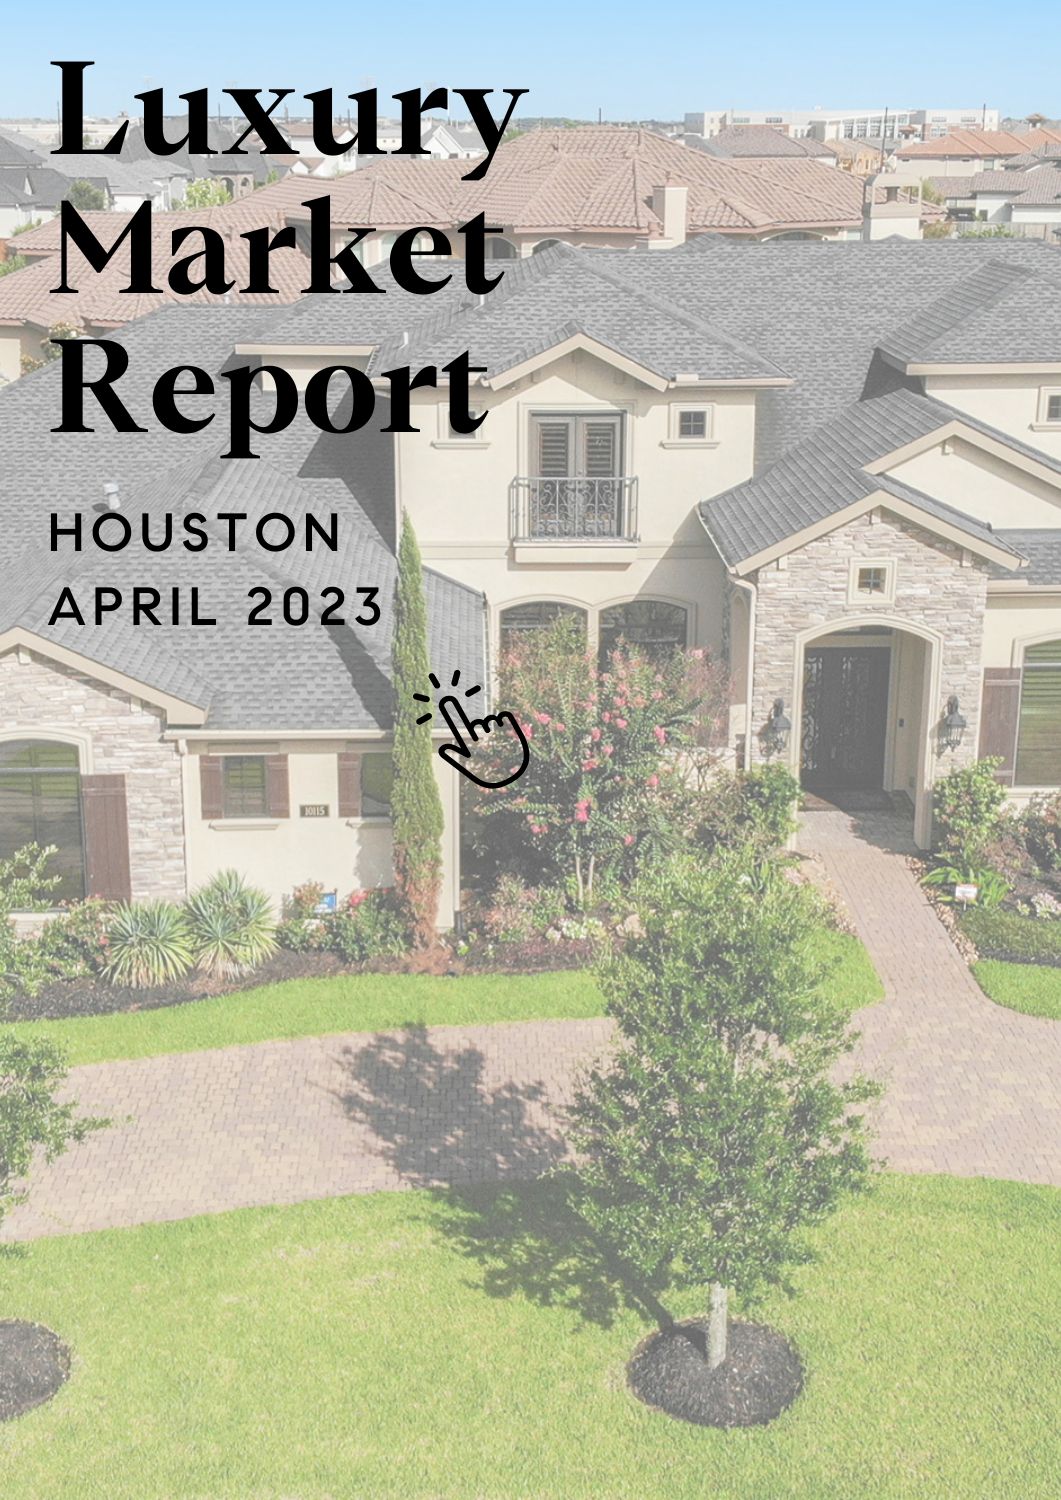 Houston Luxury Market Report April 2023 from The Jill Smith Team